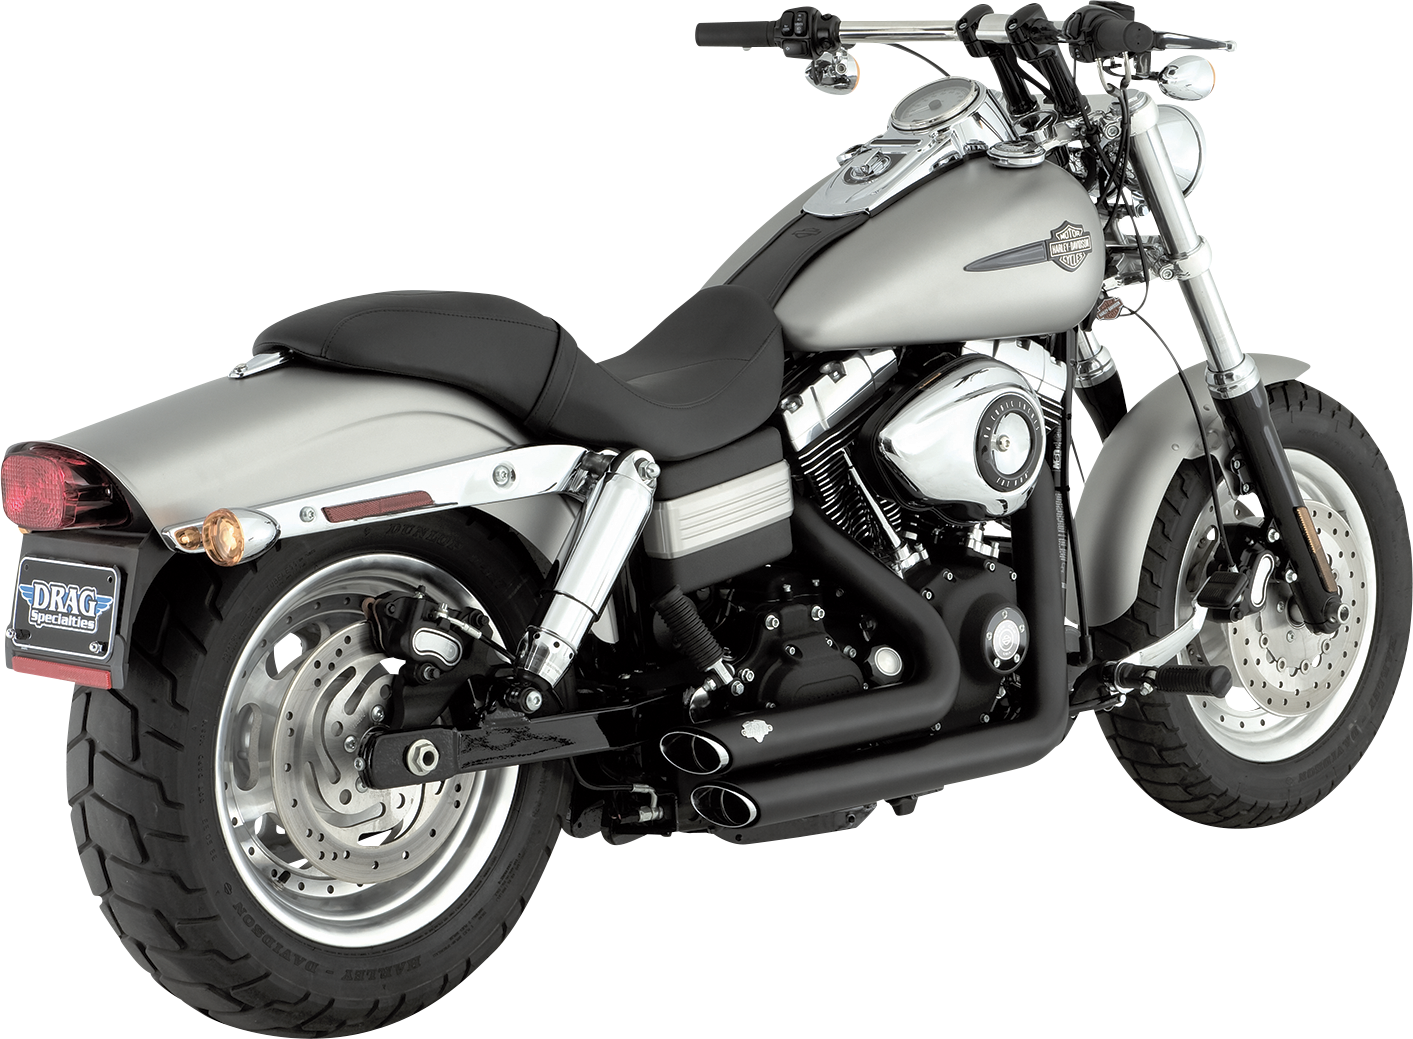 Vance & Hines Short Shot Staggered Exhaust System 2006-2011 Harley Dyna FXD CVO